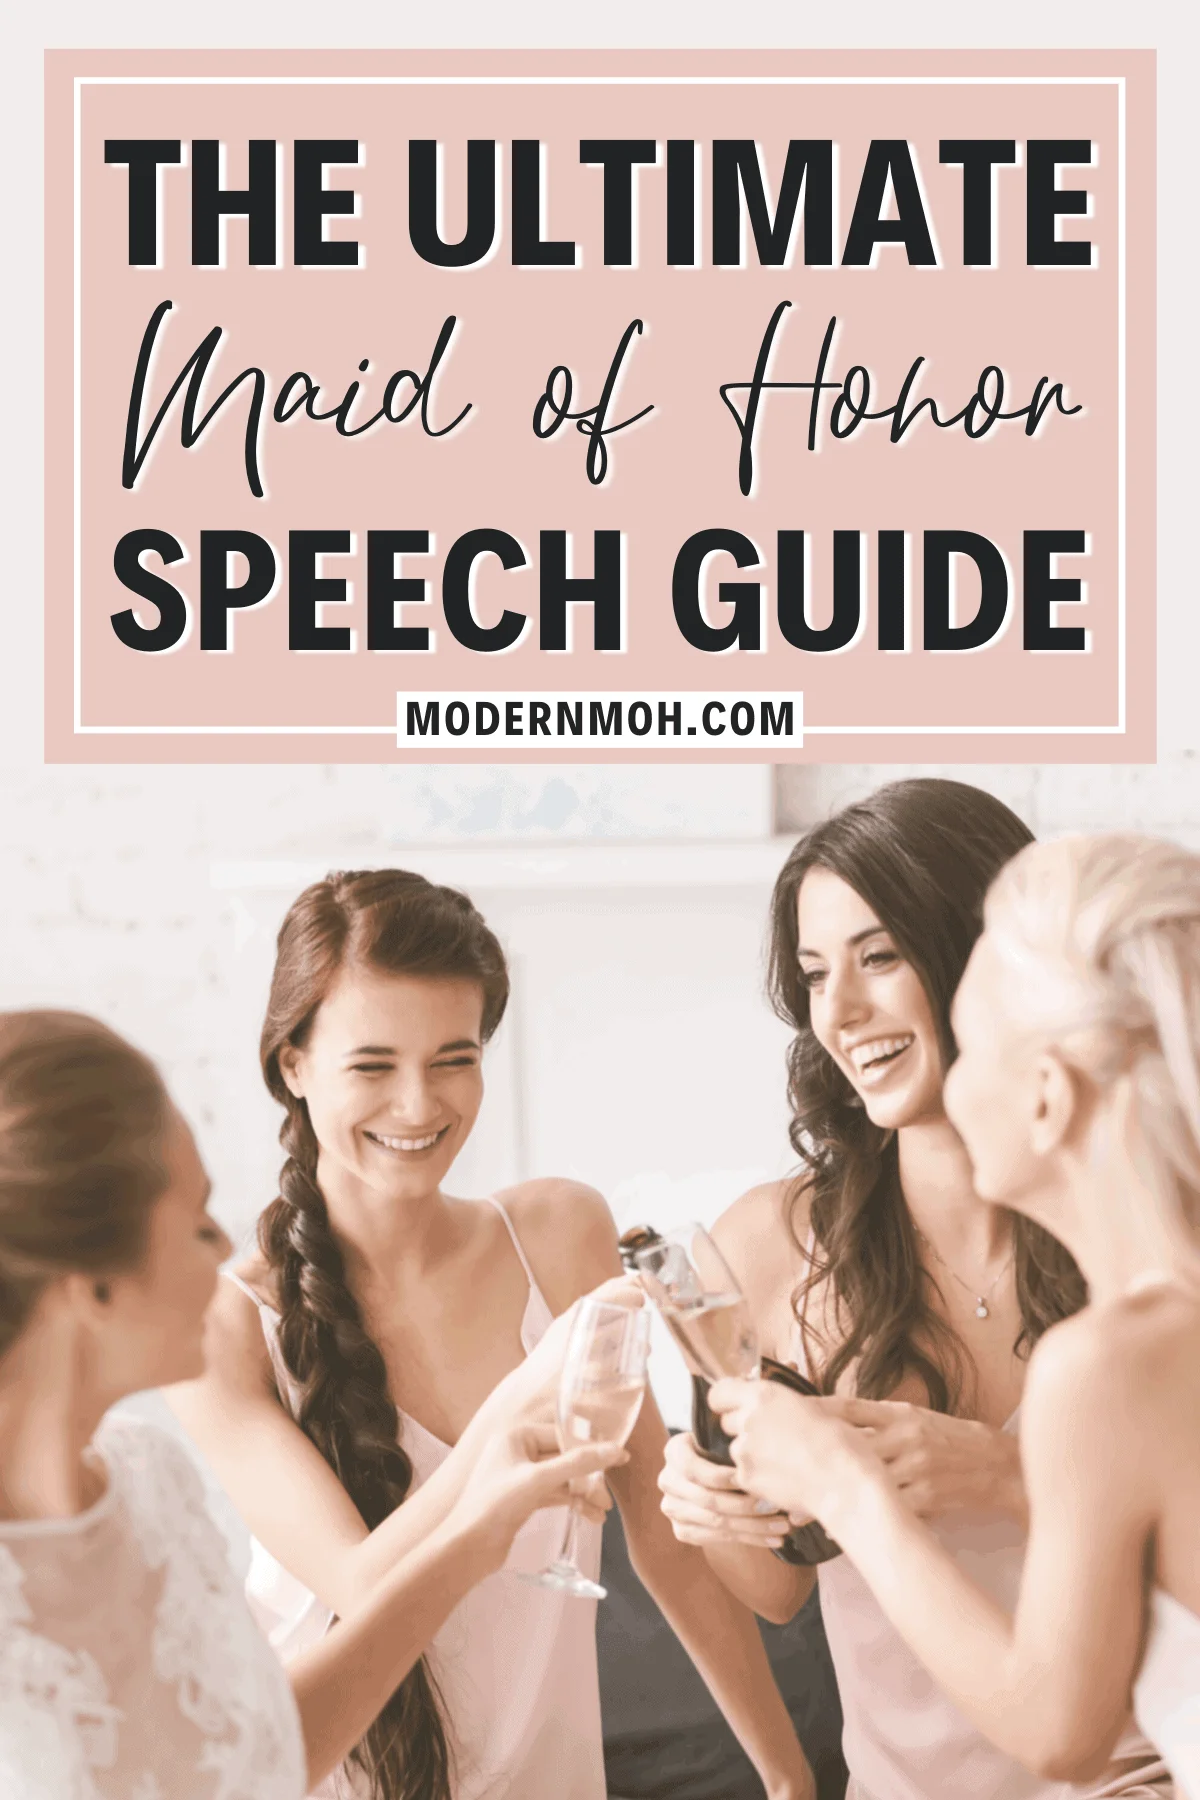 How to Write a Killer Maid of Honor Speech: The Ultimate Guide